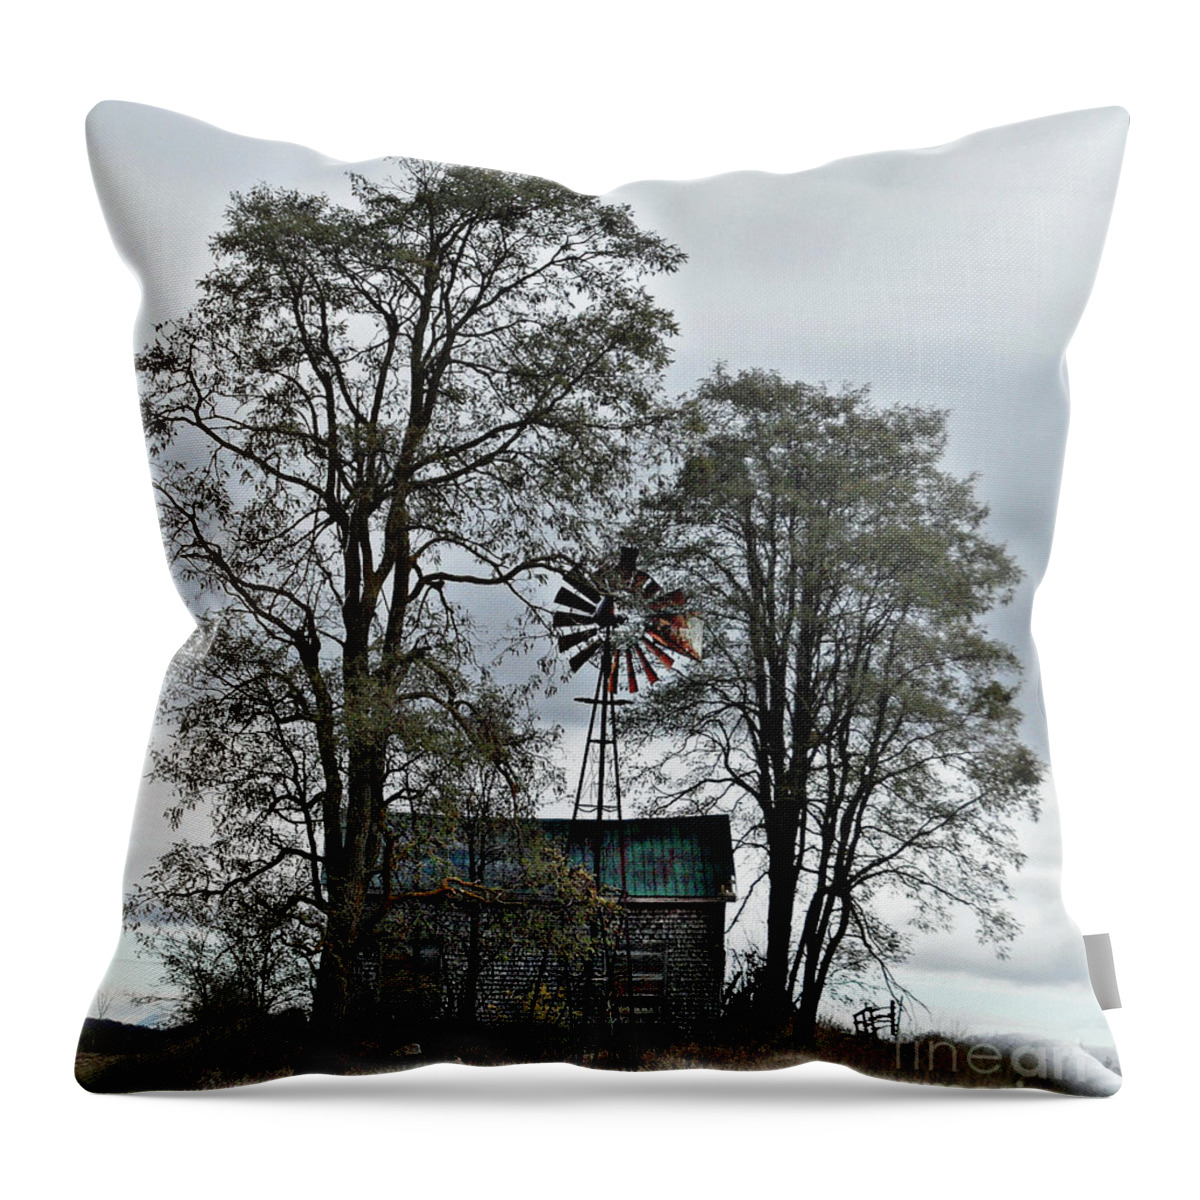 The Ultimate Find Throw Pillow featuring the photograph The Ultimate Find by Cyryn Fyrcyd